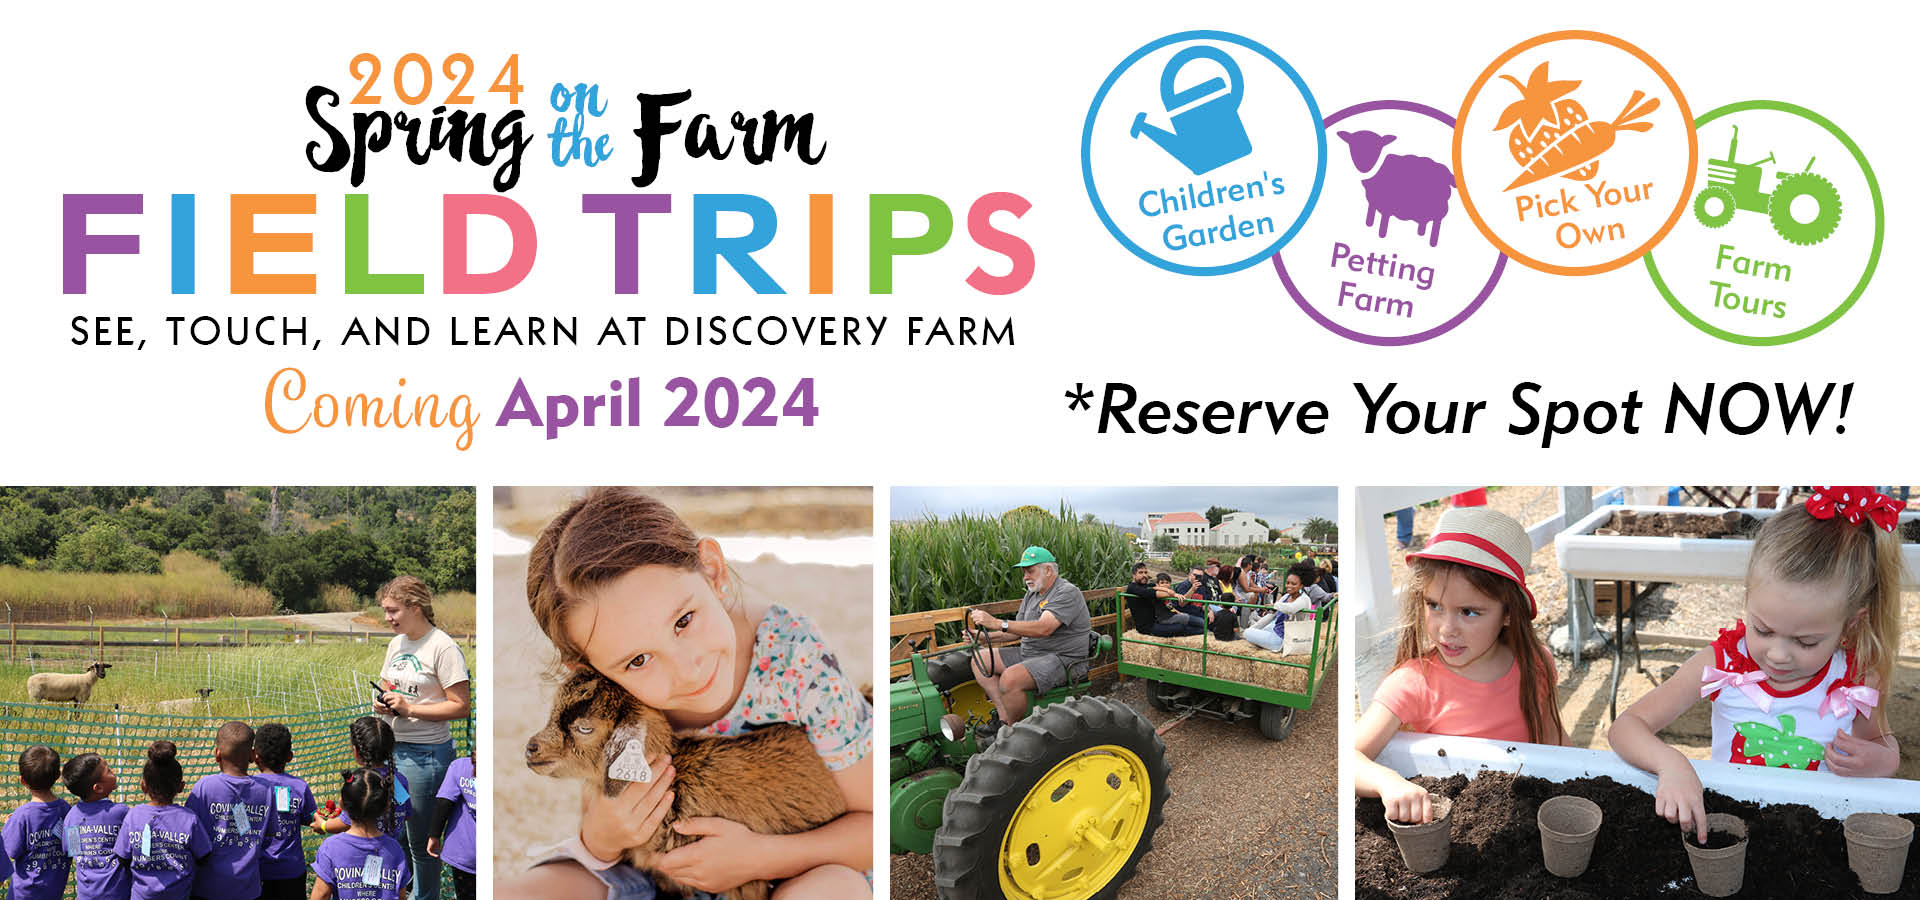 Decorative Image: Field Trips Coming April 2024; Reserve Your Spot Now